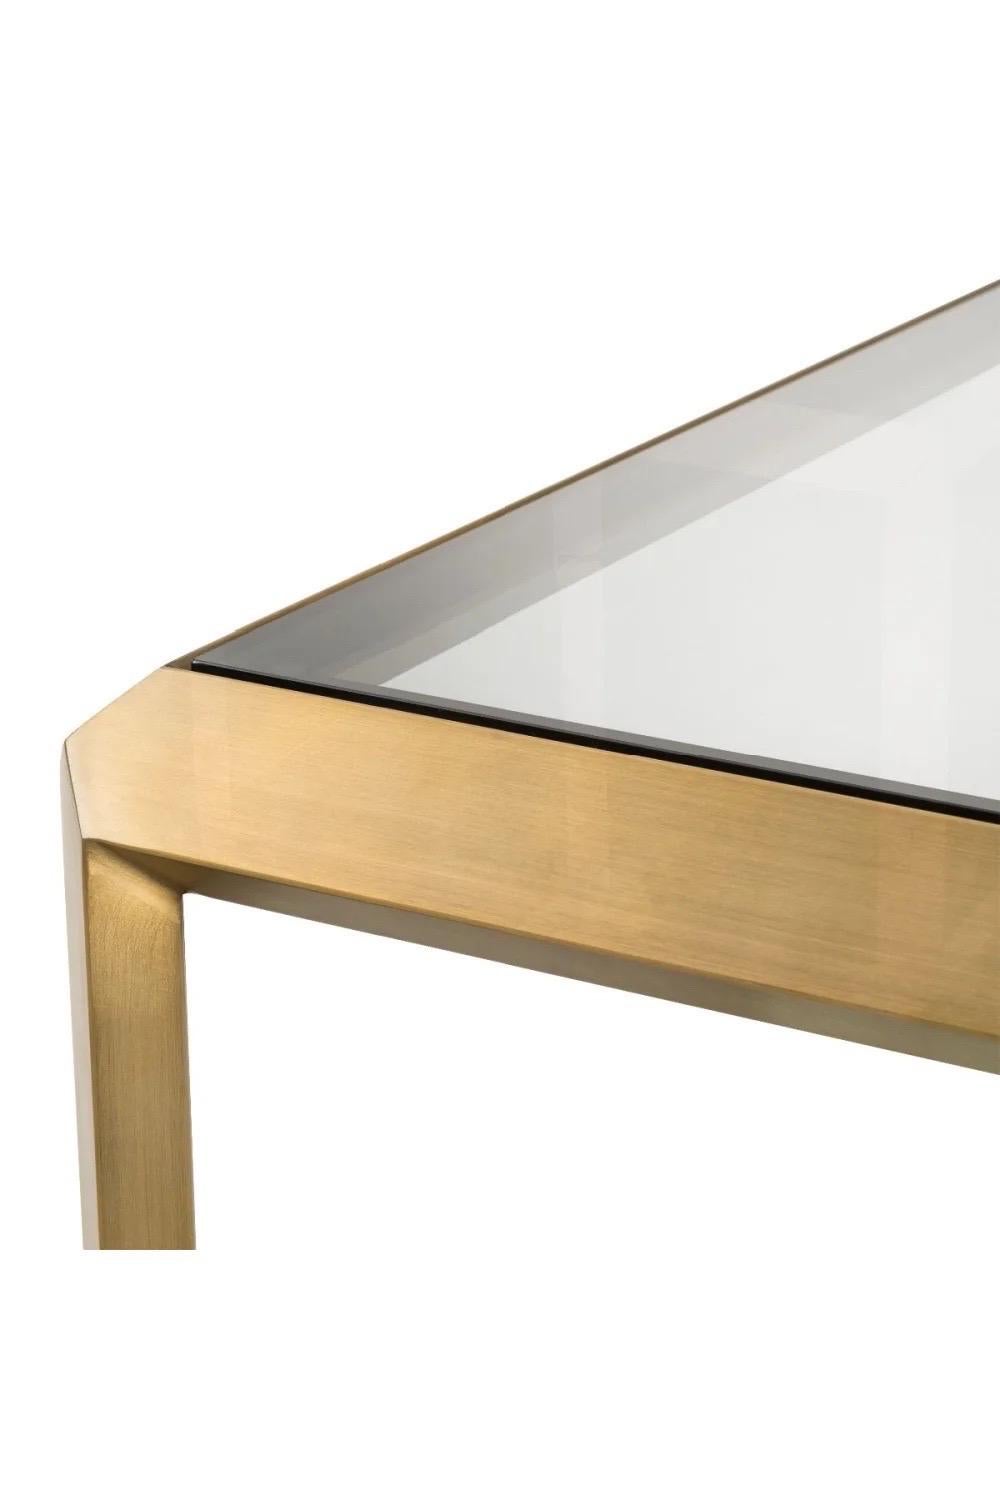 Eichholtz Callum Brushed Brass and Smoked Glass Square Side Table, a Pair In Excellent Condition For Sale In Farmington Hills, MI